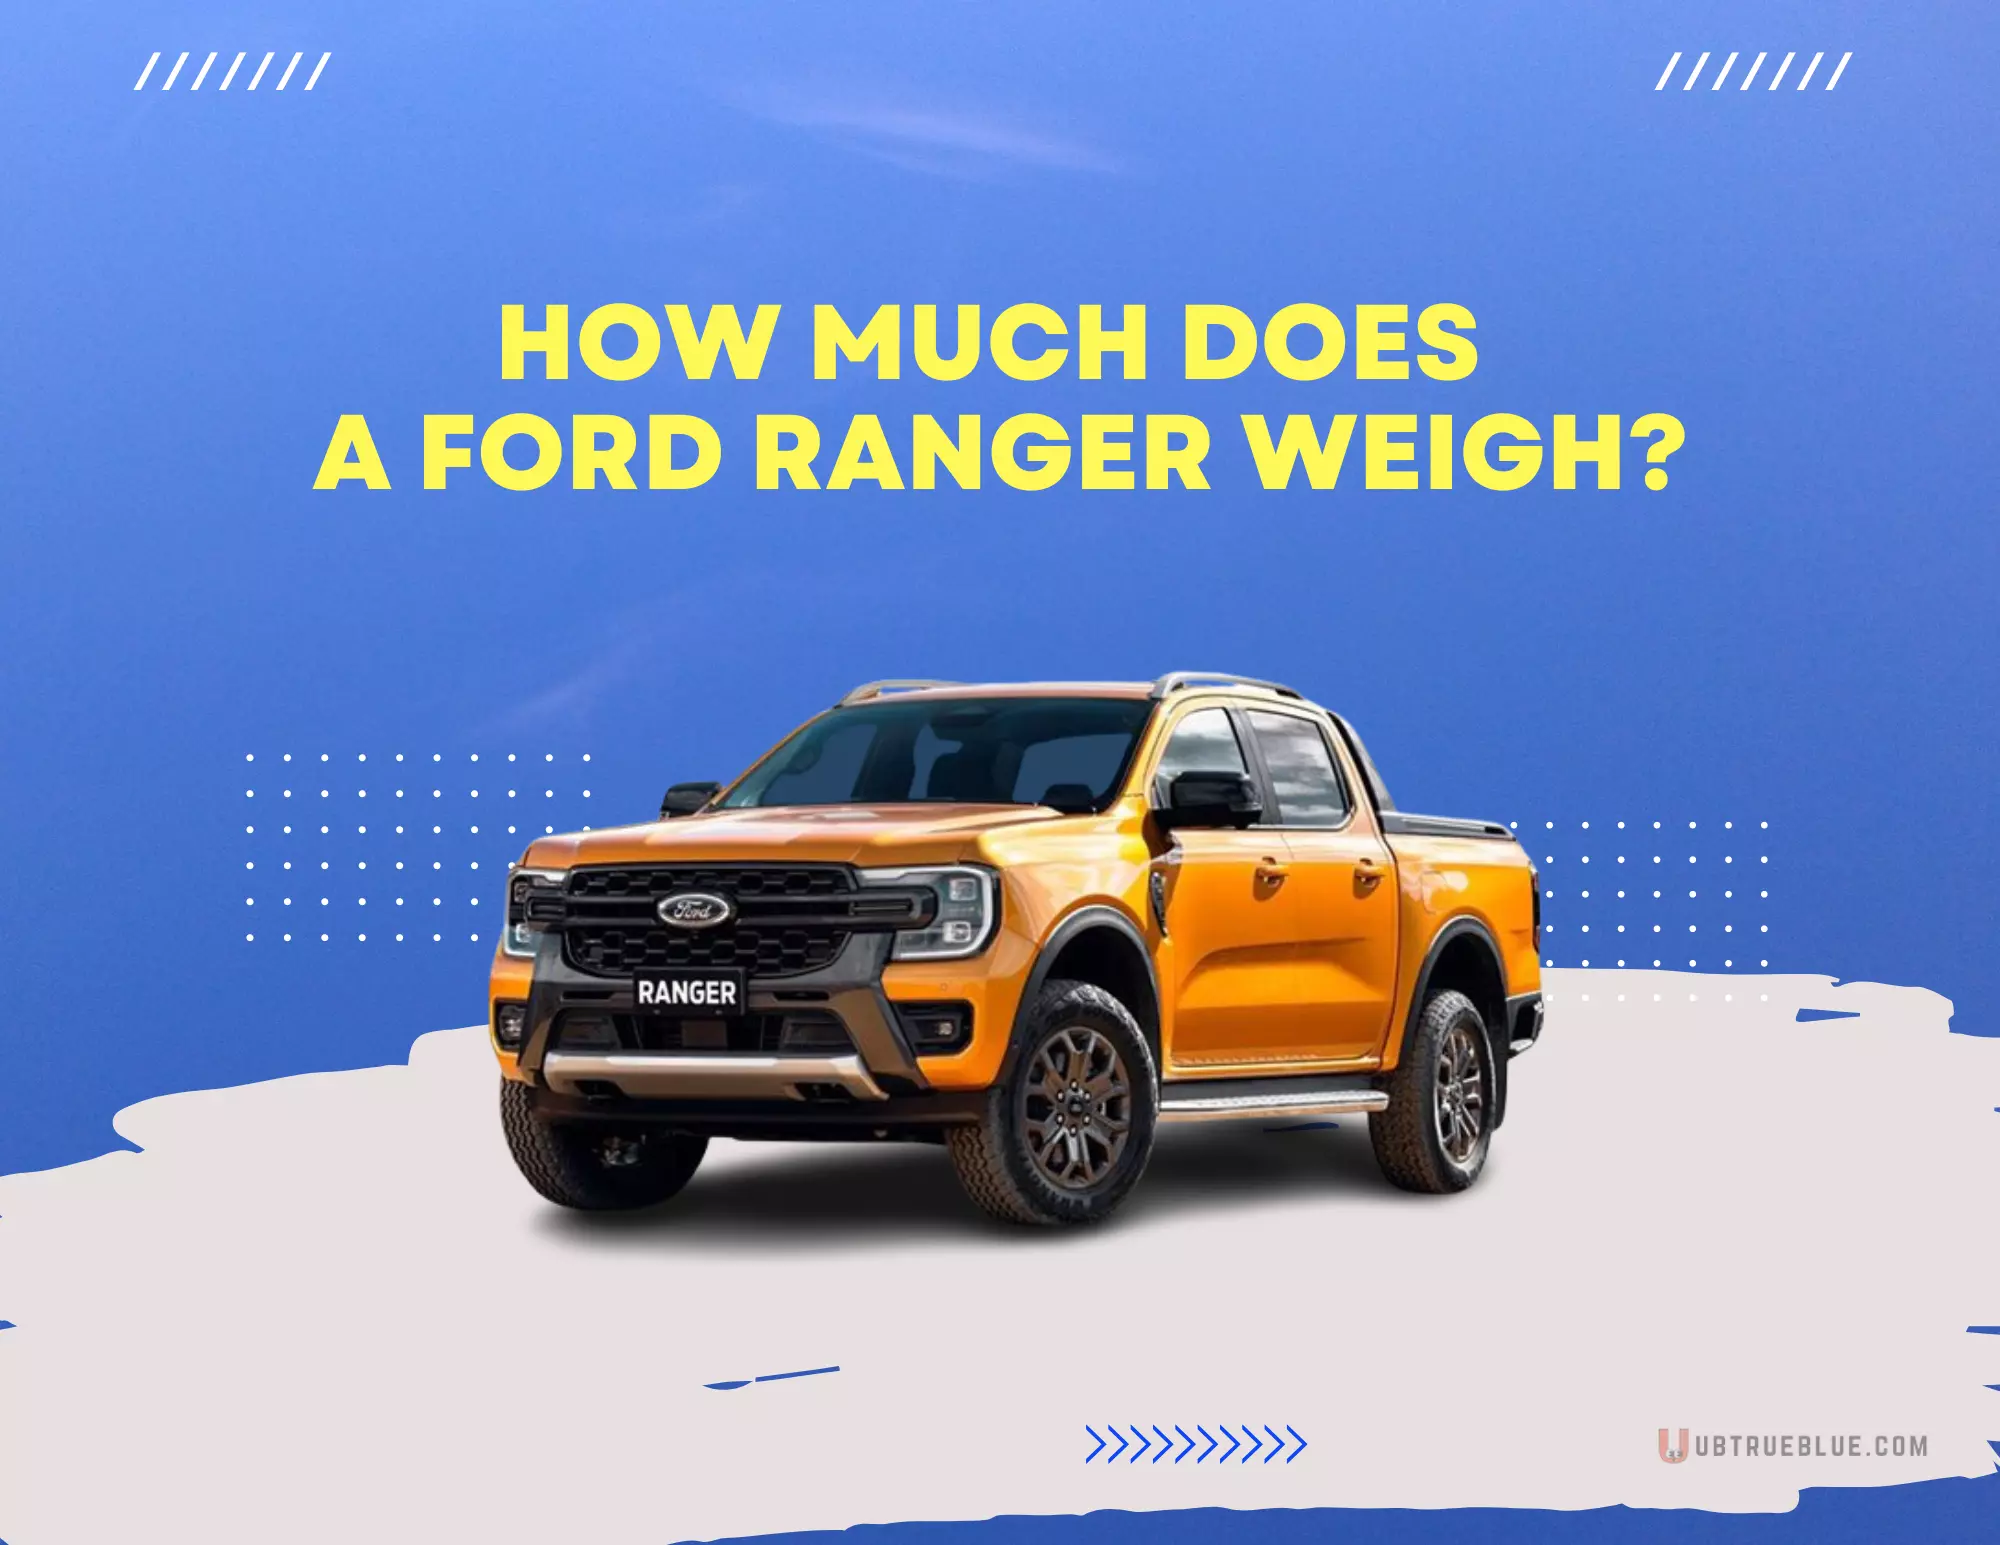 How Much Does A Ford Ranger Weigh On Ubtrueblue Automotive Weigh? Average Weight Explained 2000 In Tons Dimensions Kg Wildtrak  Full